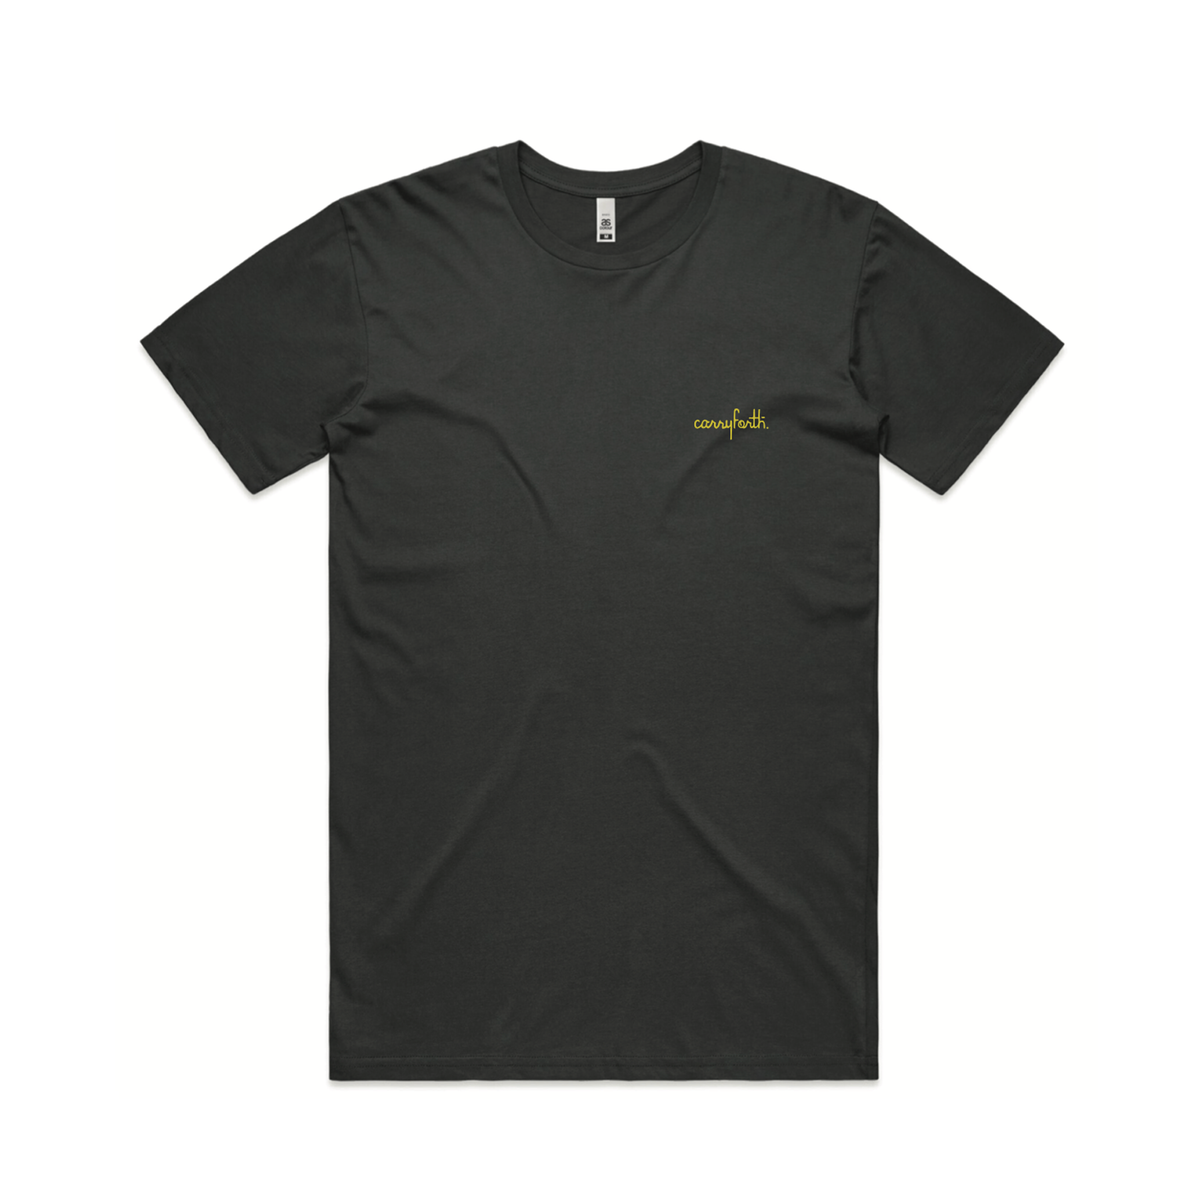 Hero image of black shirt with carry forth written in gold cursive on the chest